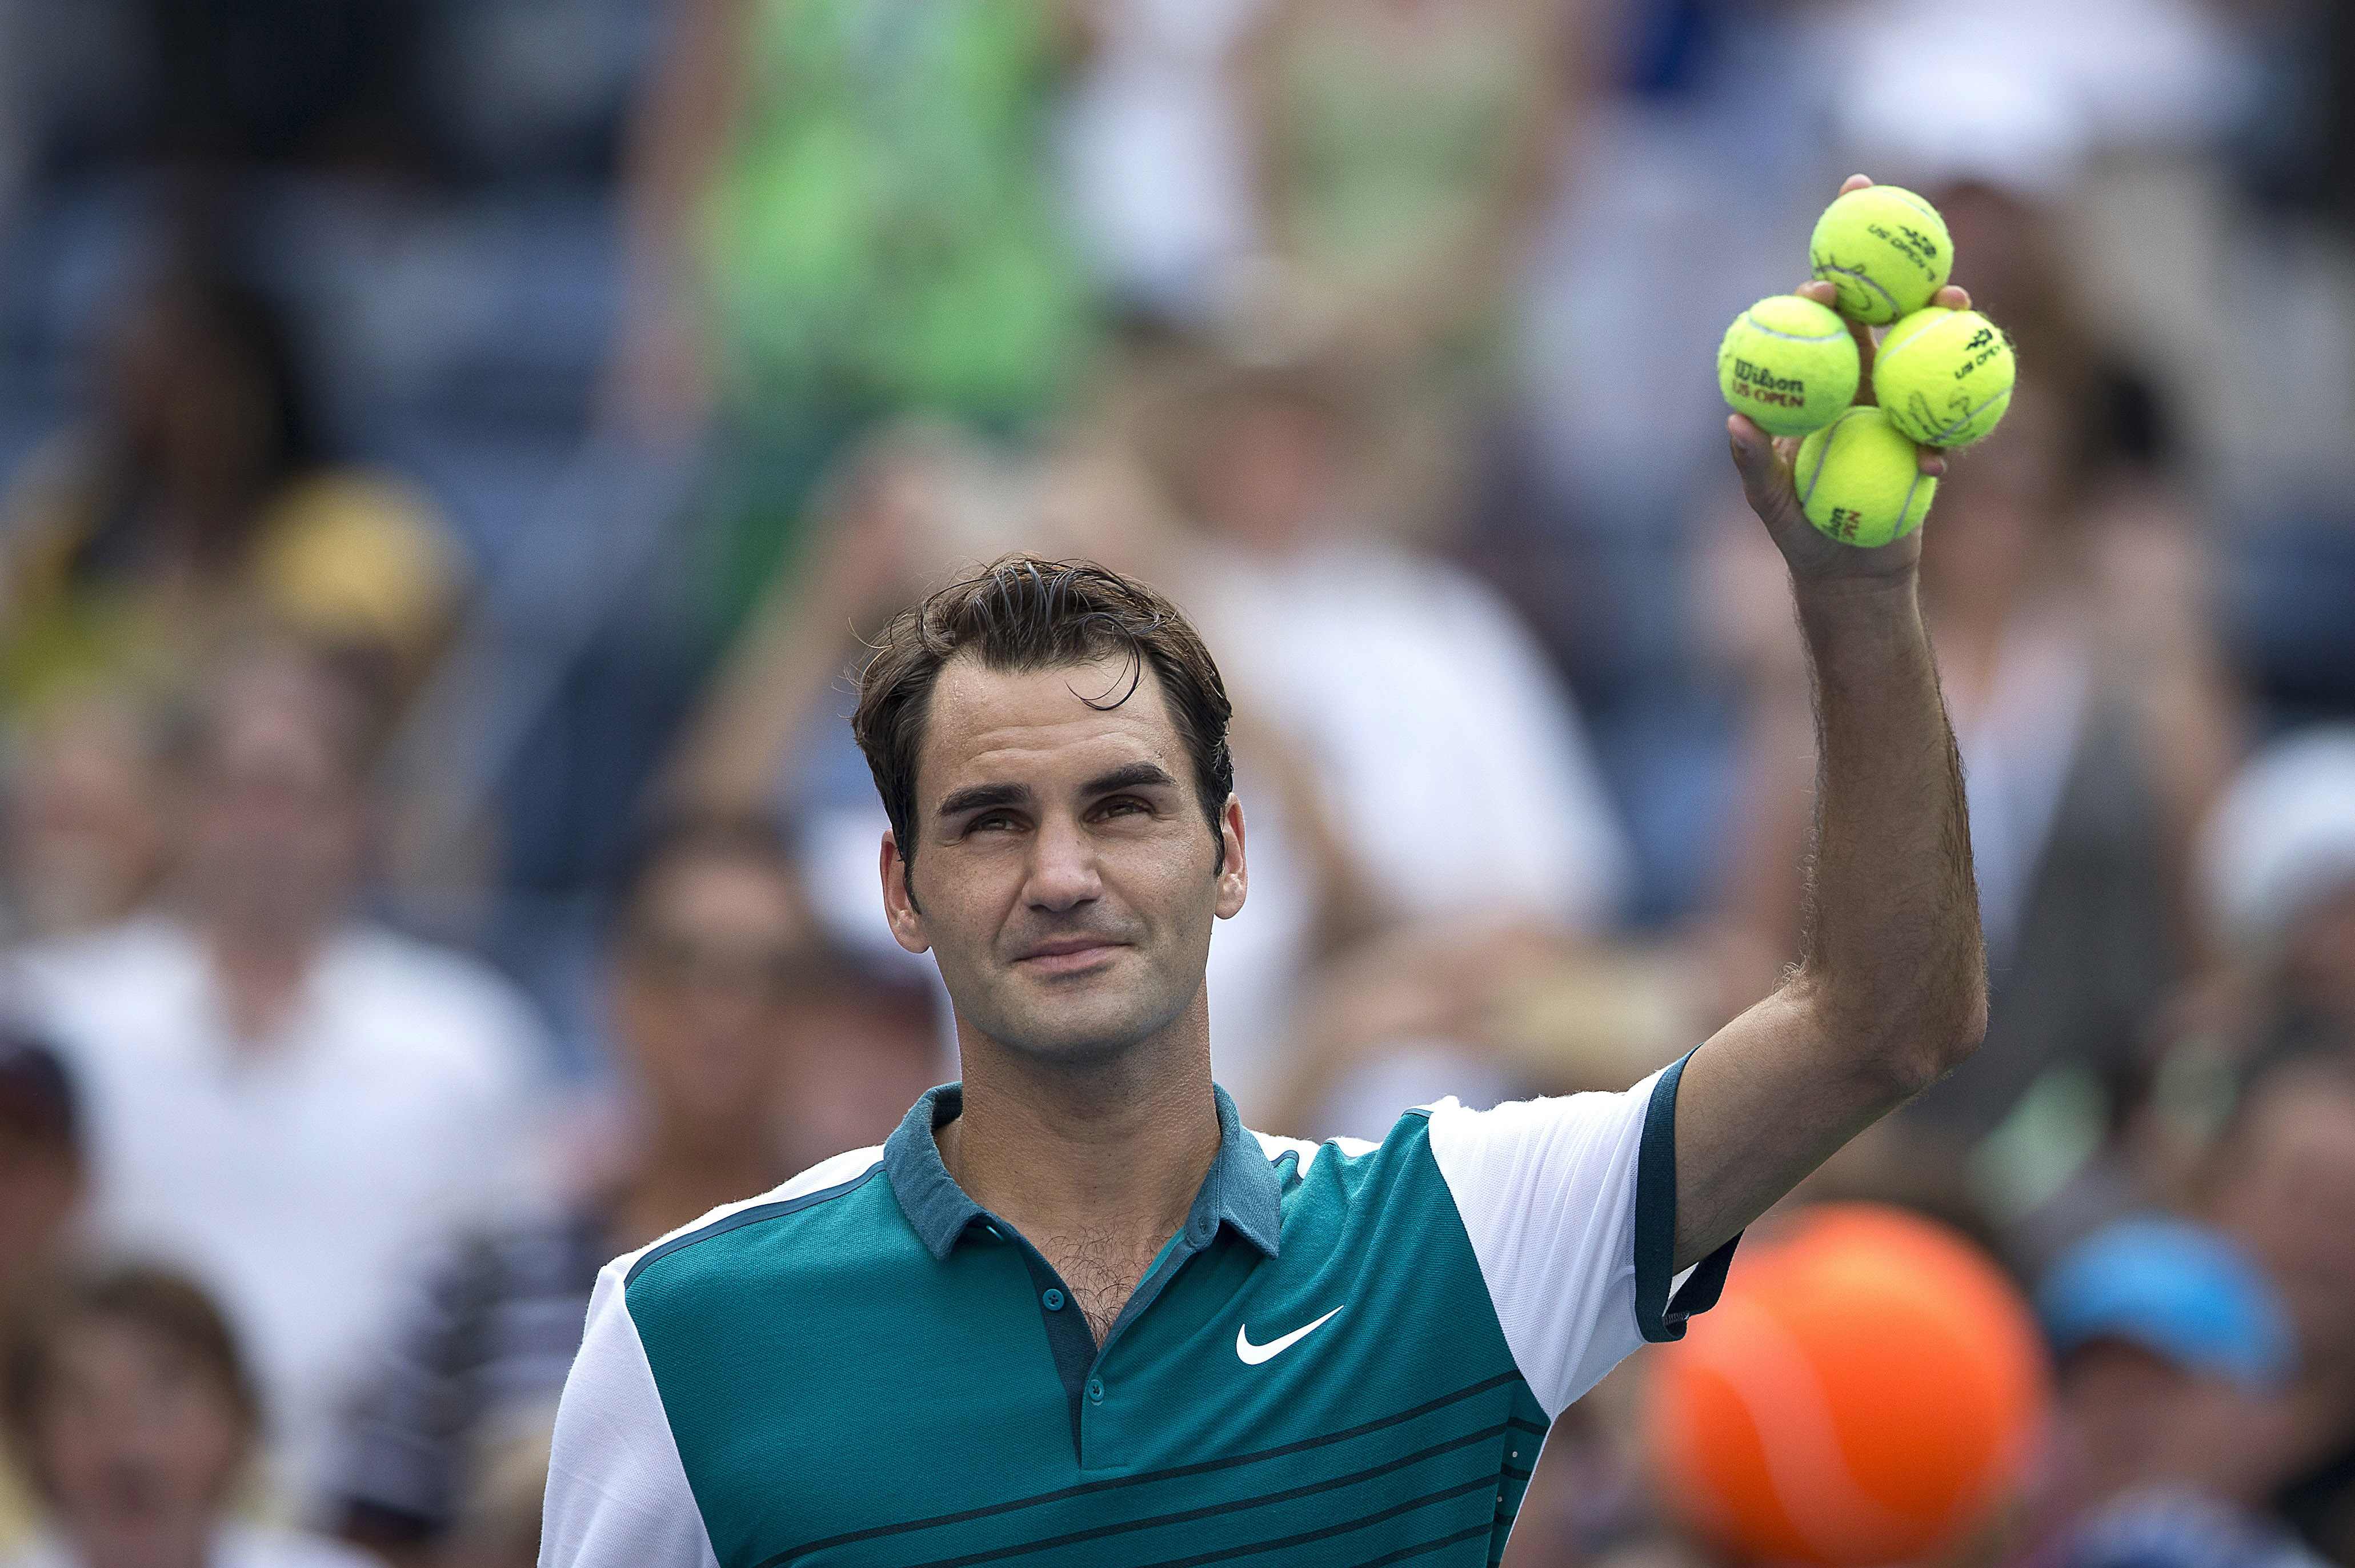 Roger Federer of Switzerland eased into round two with a a straight sets win over Leonardo Mayer of Argentina in their first round match at the US Open. Photo: Reuters